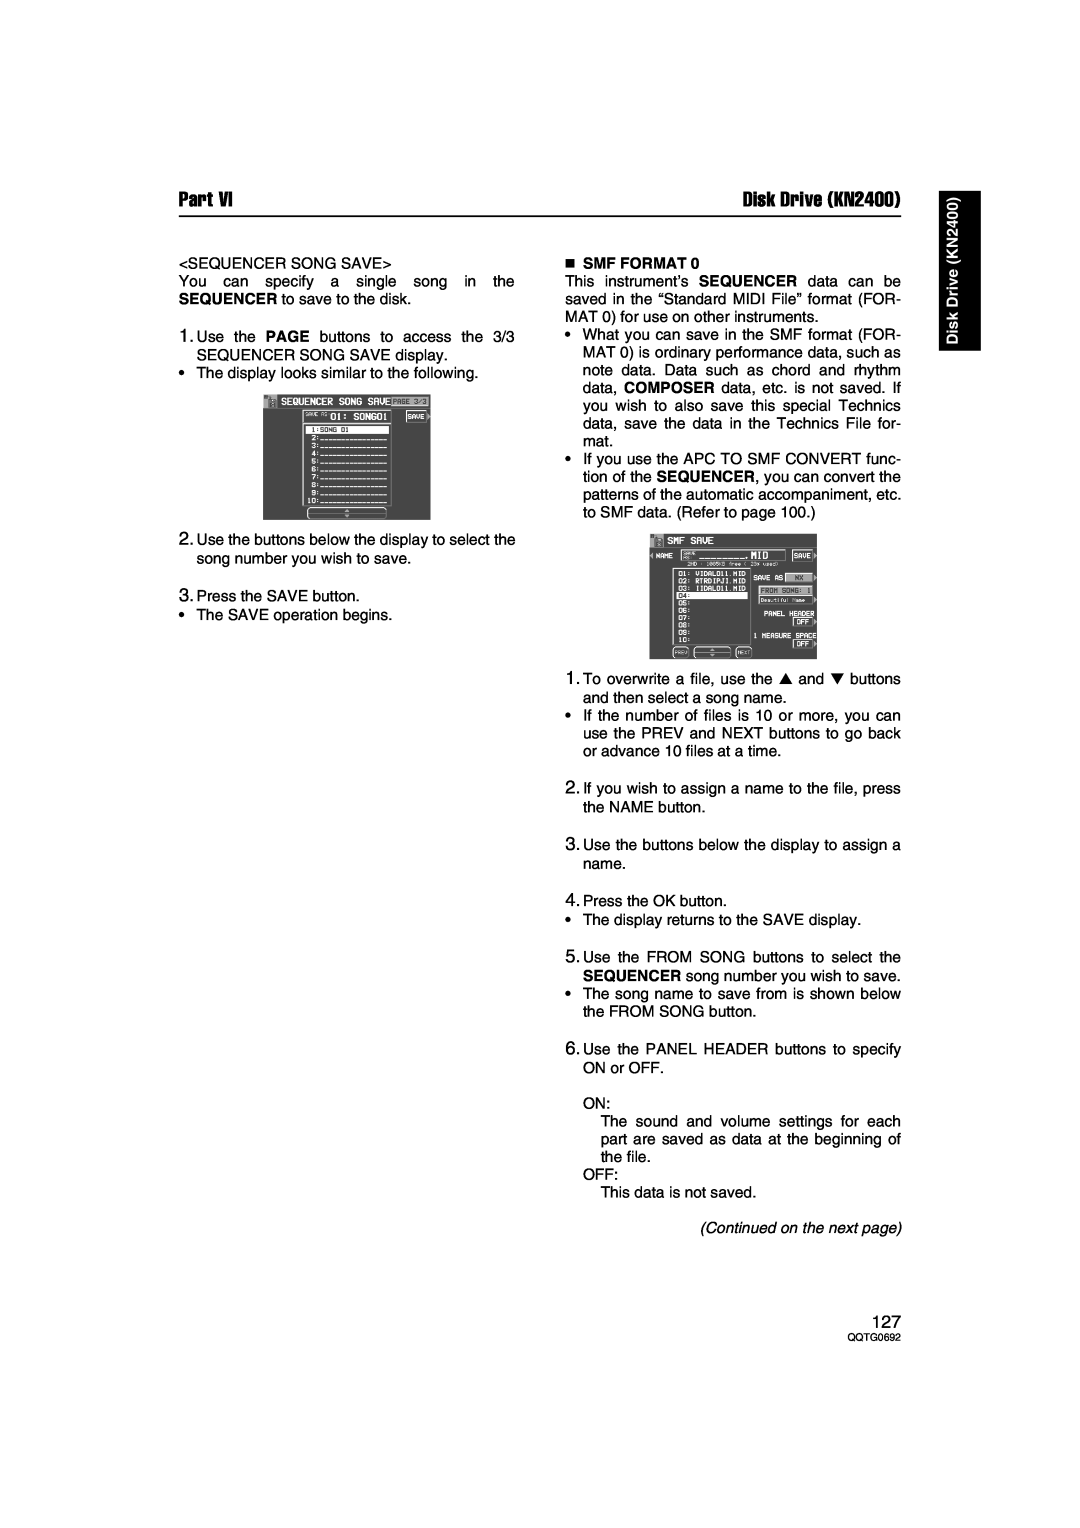 Panasonic SX-KN2400, SX-KN2600 manual Smf Format, Part, Disk Drive KN2400, Continued on the next page 